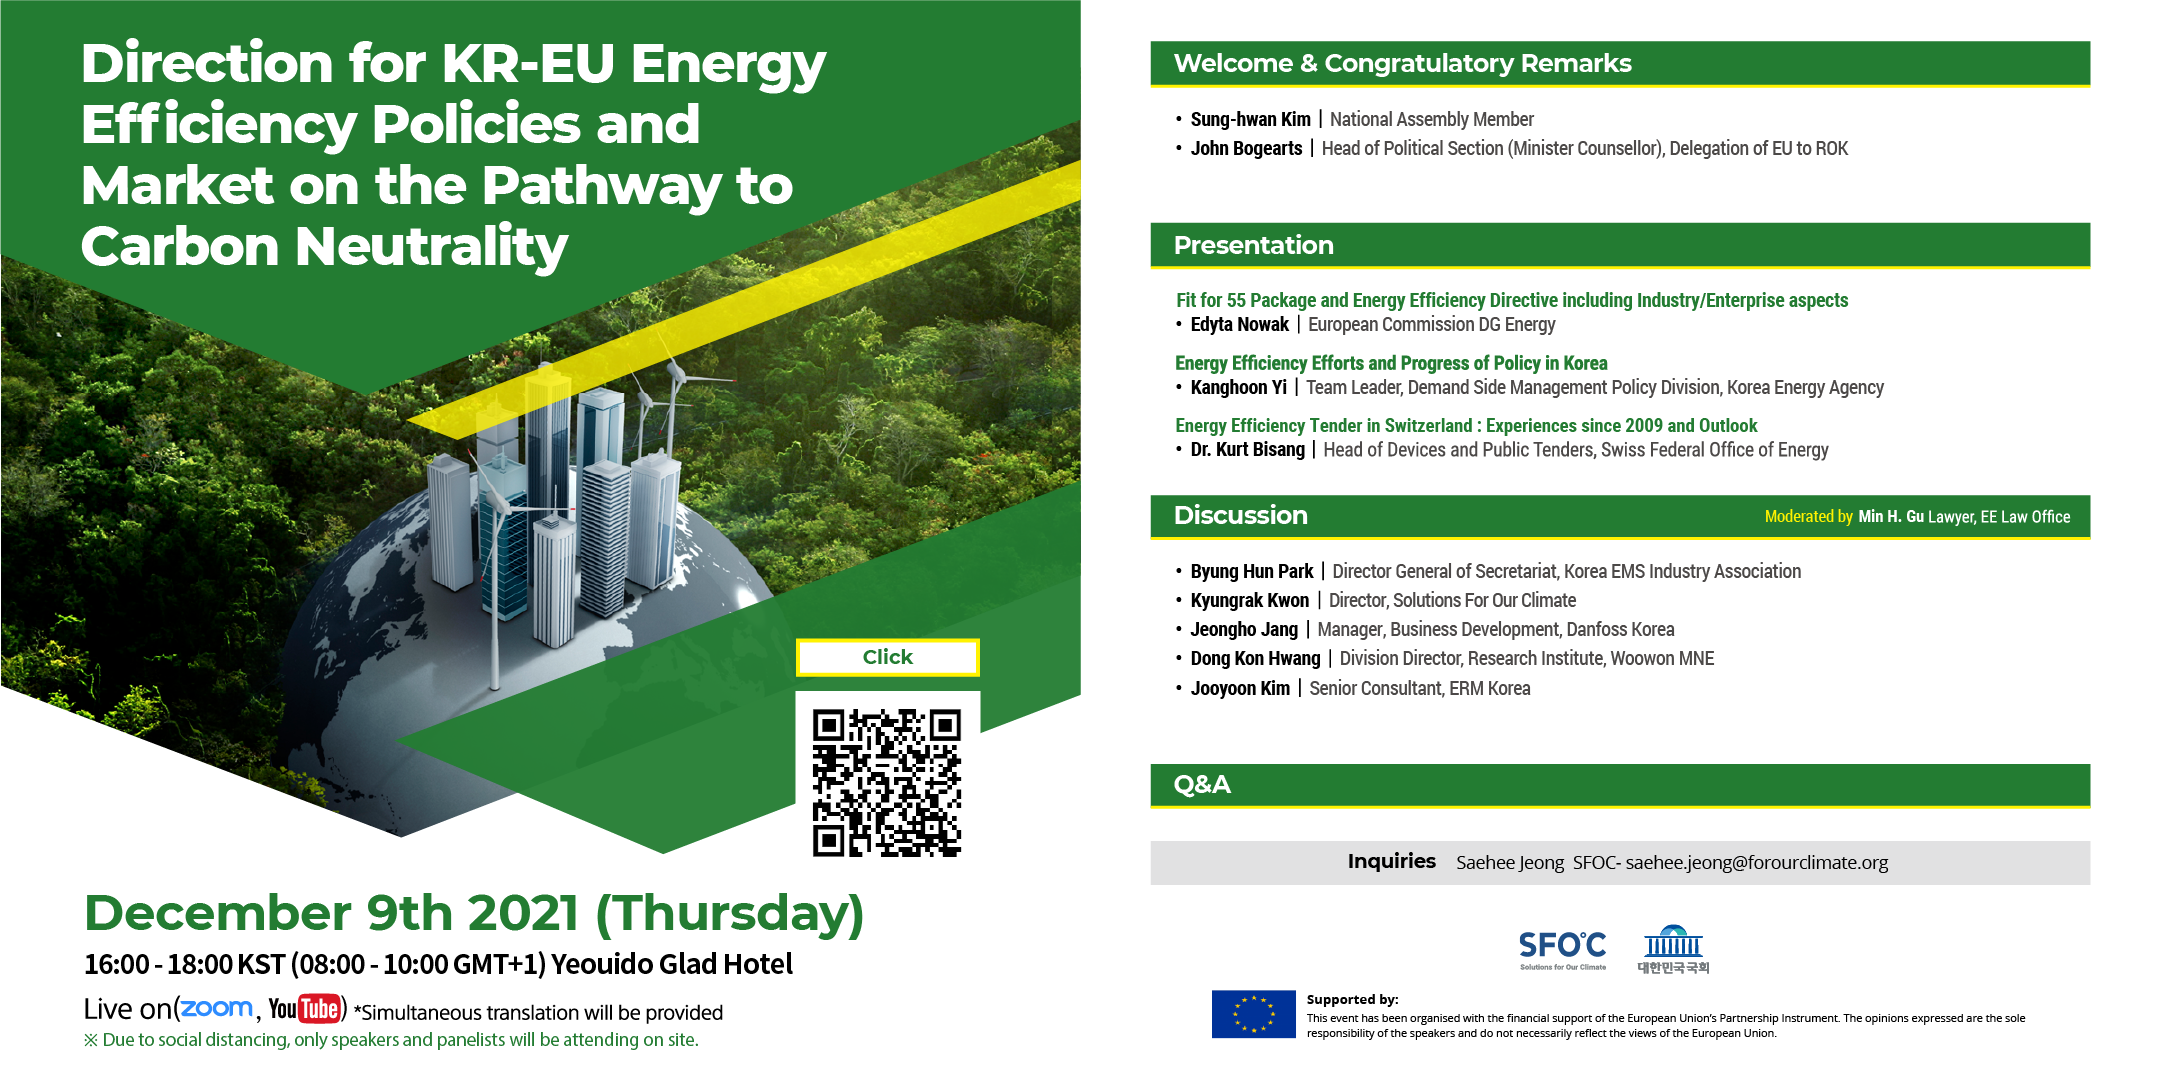 Direction for KR-EU Energy Efficiency Policies and Market on the Pathway to Carbon Neutrality